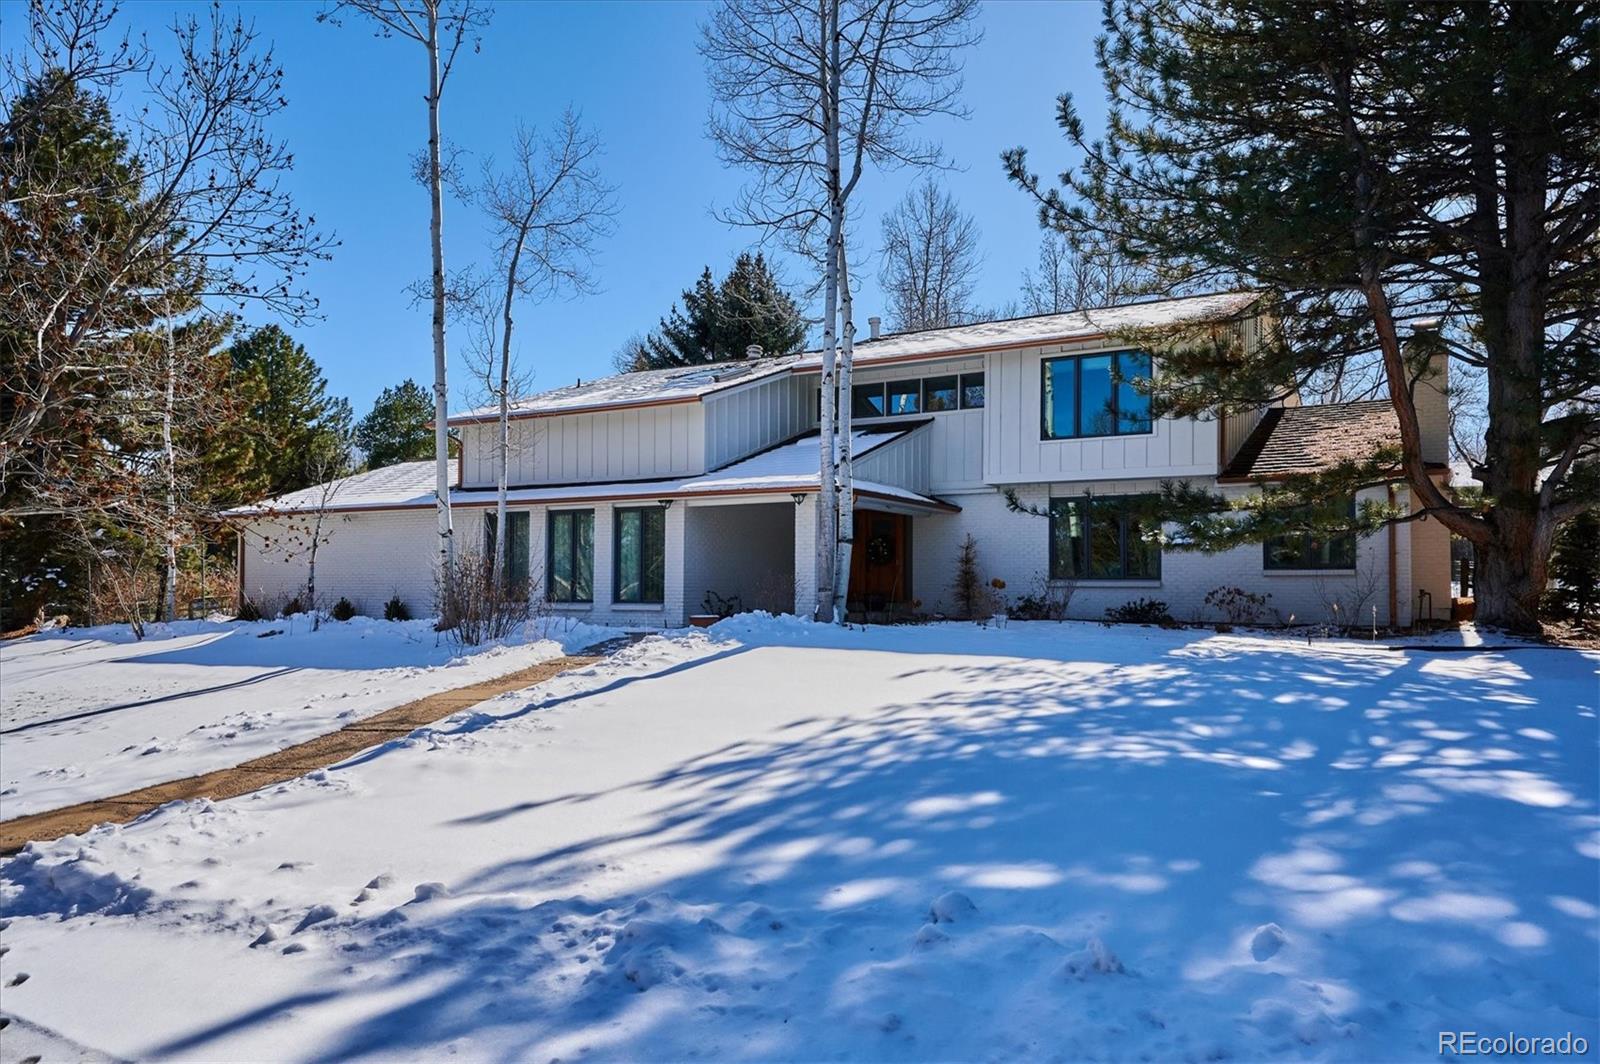 Report Image for 5286 S Franklin Circle,Greenwood Village, Colorado